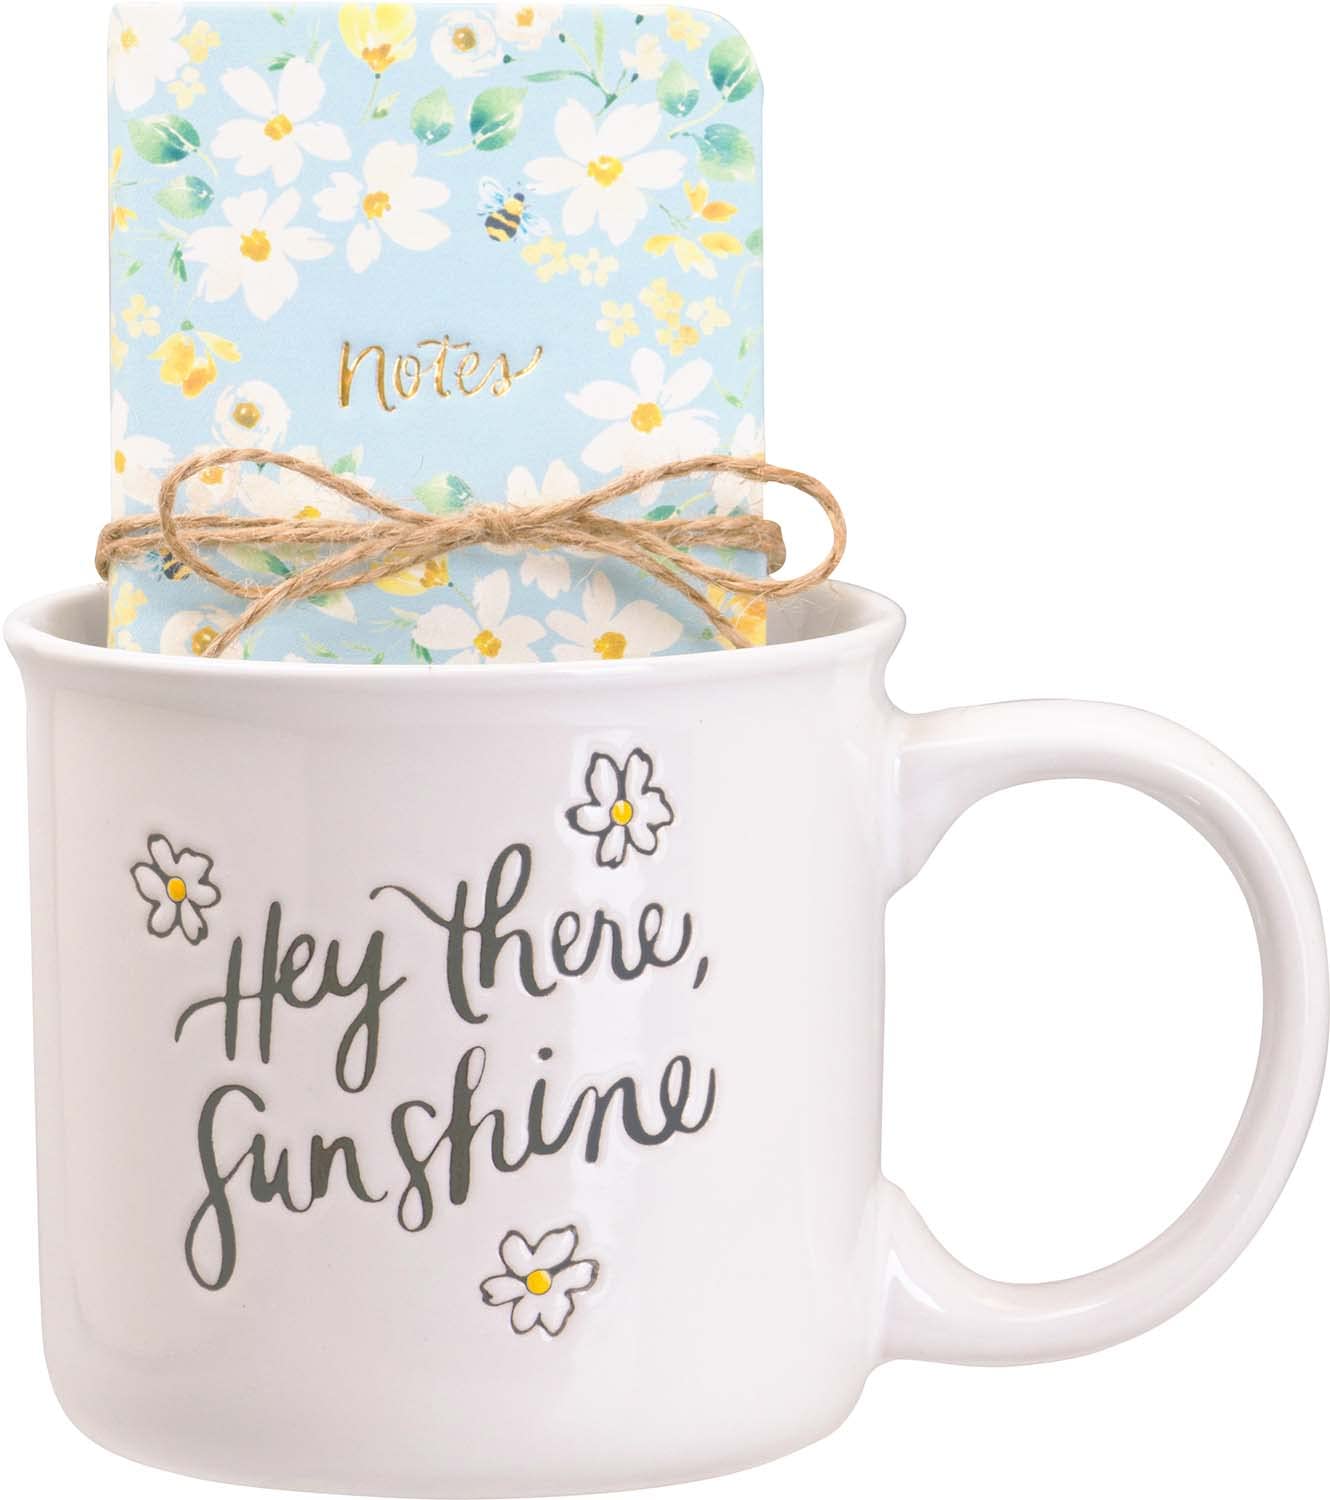 Eccolo_Daisy_Design_Coffee_Mug_and_Lined_Notebook_Pen_Gift_Set_Hey_There_Sunshine_Stoneware_Camper_Mug_with_Handles